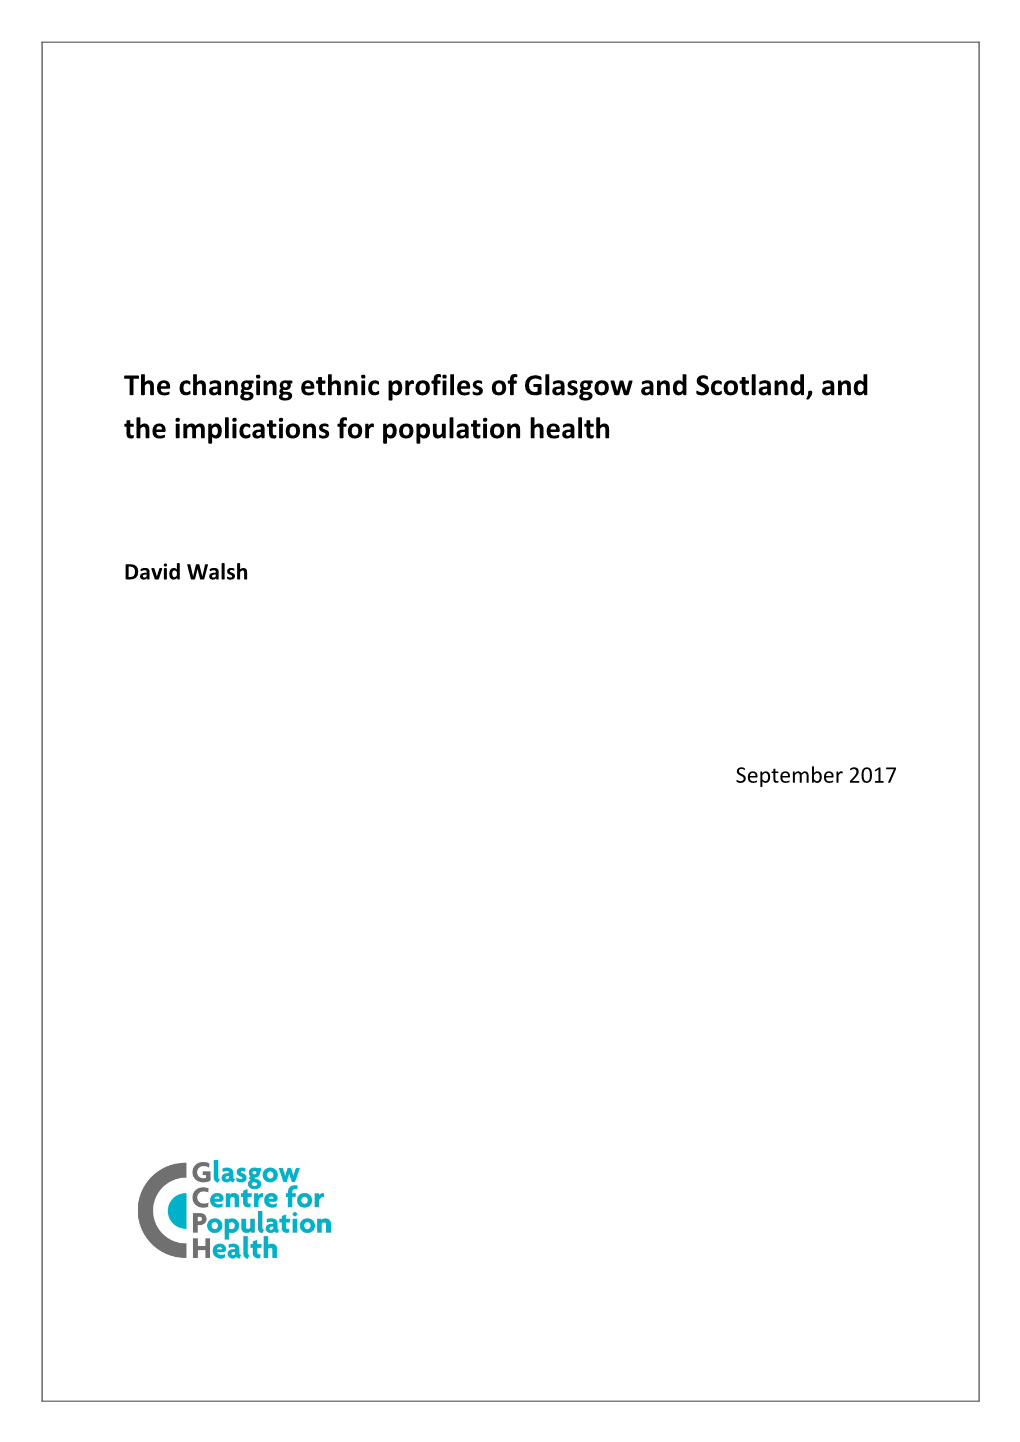 The Changing Ethnic Profiles of Glasgow and Scotland, and the Implications for Population Health